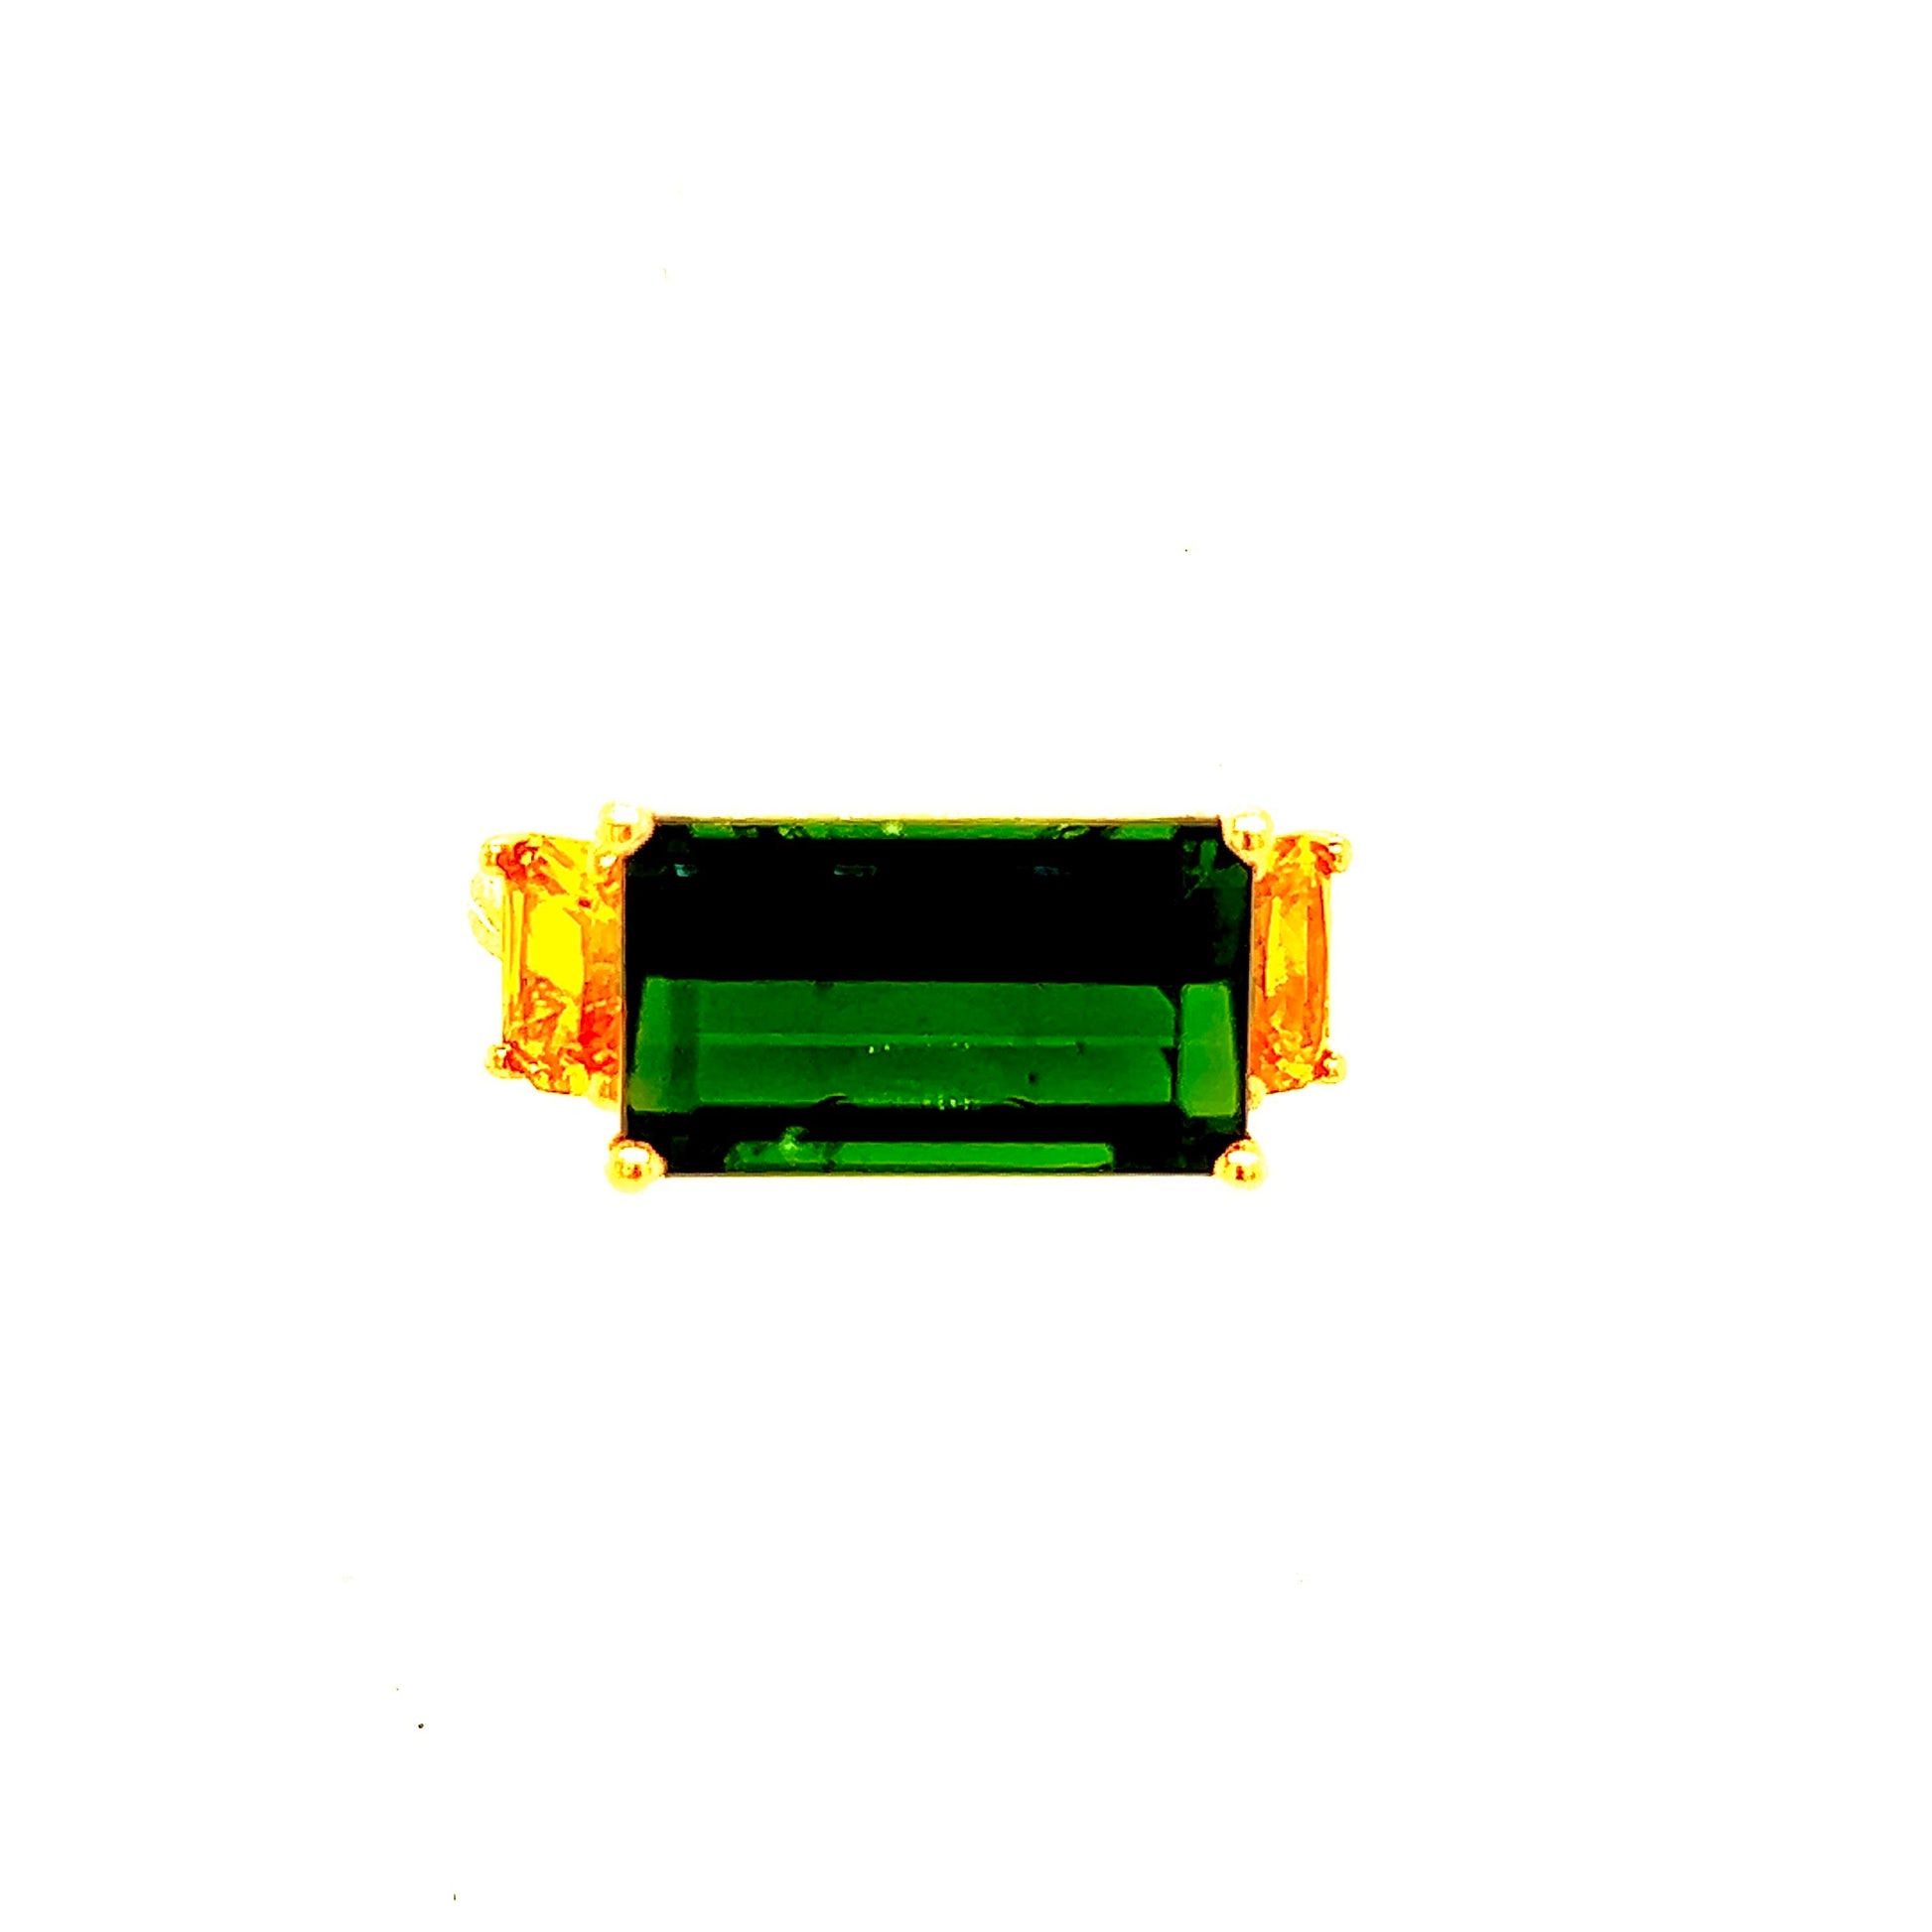 Natural Tourmaline Diamond Ring Size 7 14 Y Gold 7.03 TCW Certified $6,490 219226 - Certified Fine Jewelry